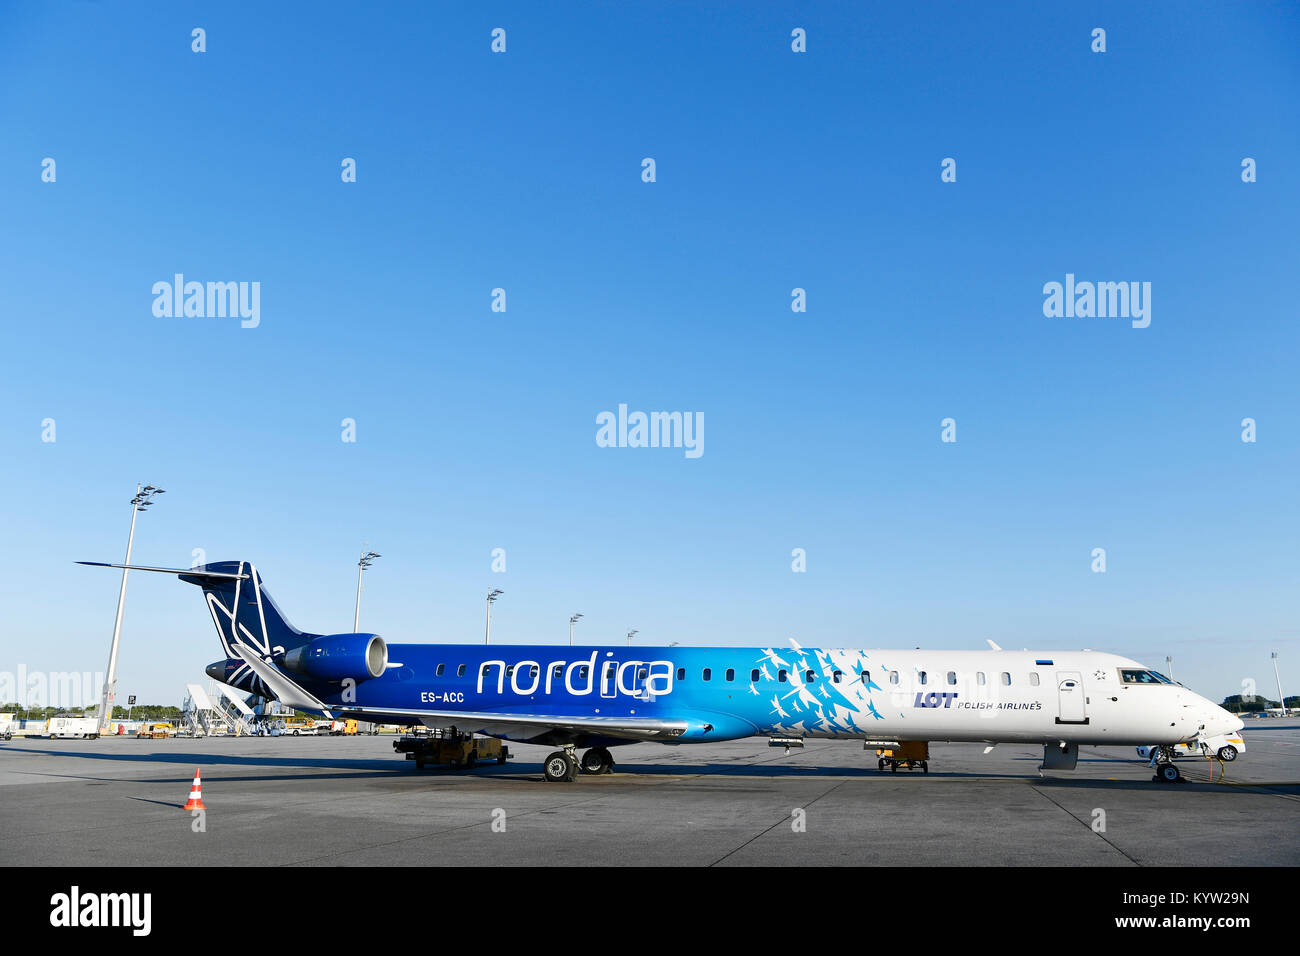 Nordica, Canadair Regional Jet, CRJ-900, ES-ACC, aircraft, airplane, plane, airlines, airways, roll, in, out,  Munich Airport, Stock Photo